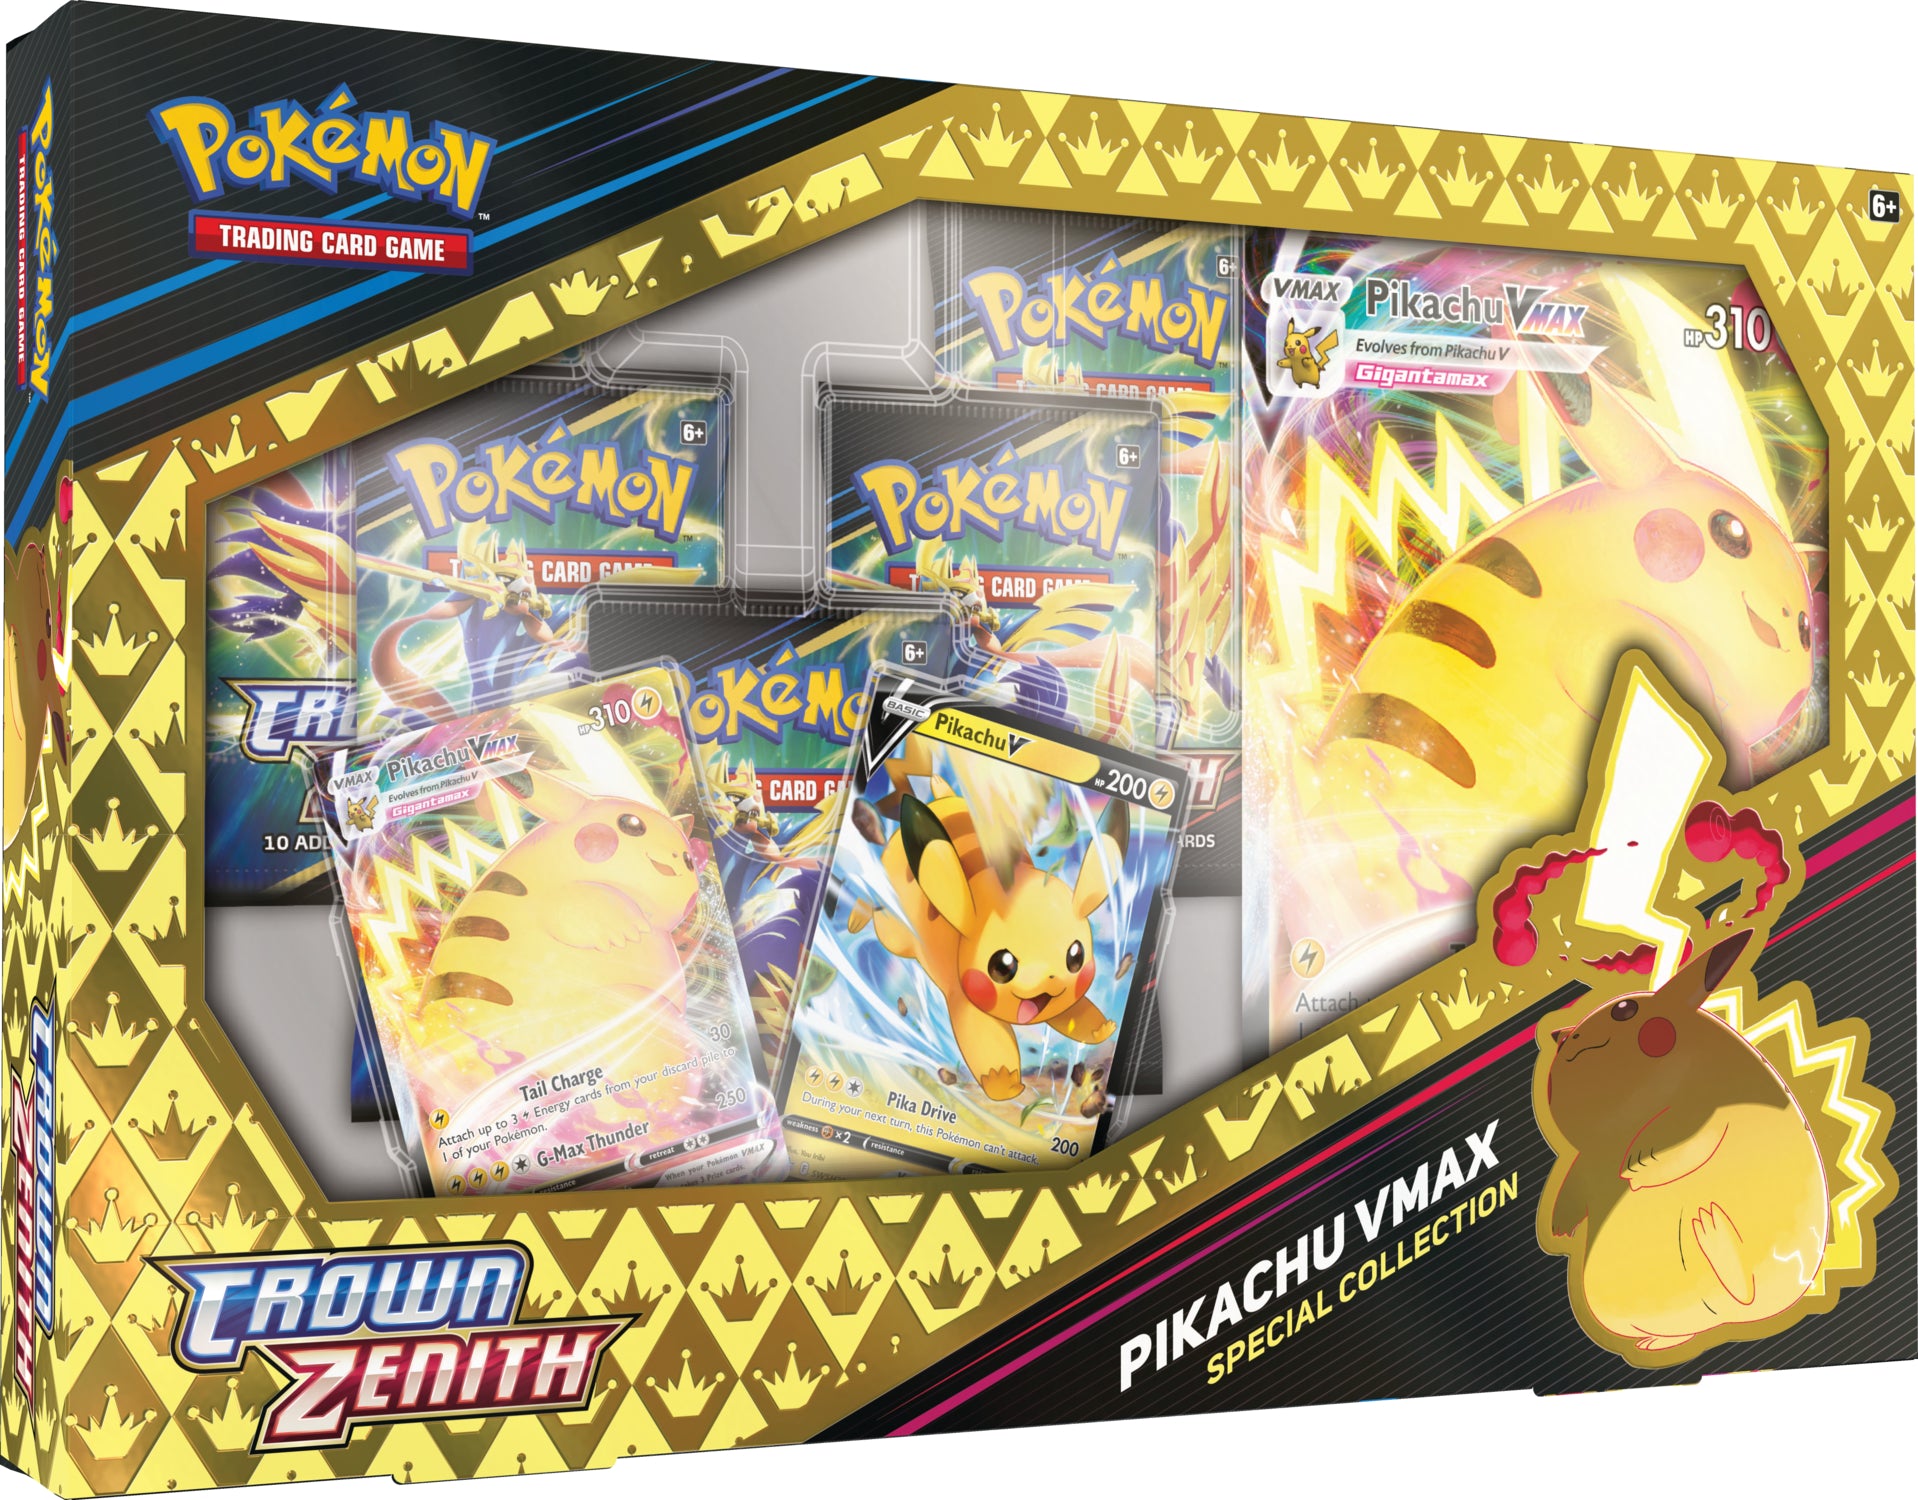 Crown Zenith - Pikachu Vmax Special Collection Box